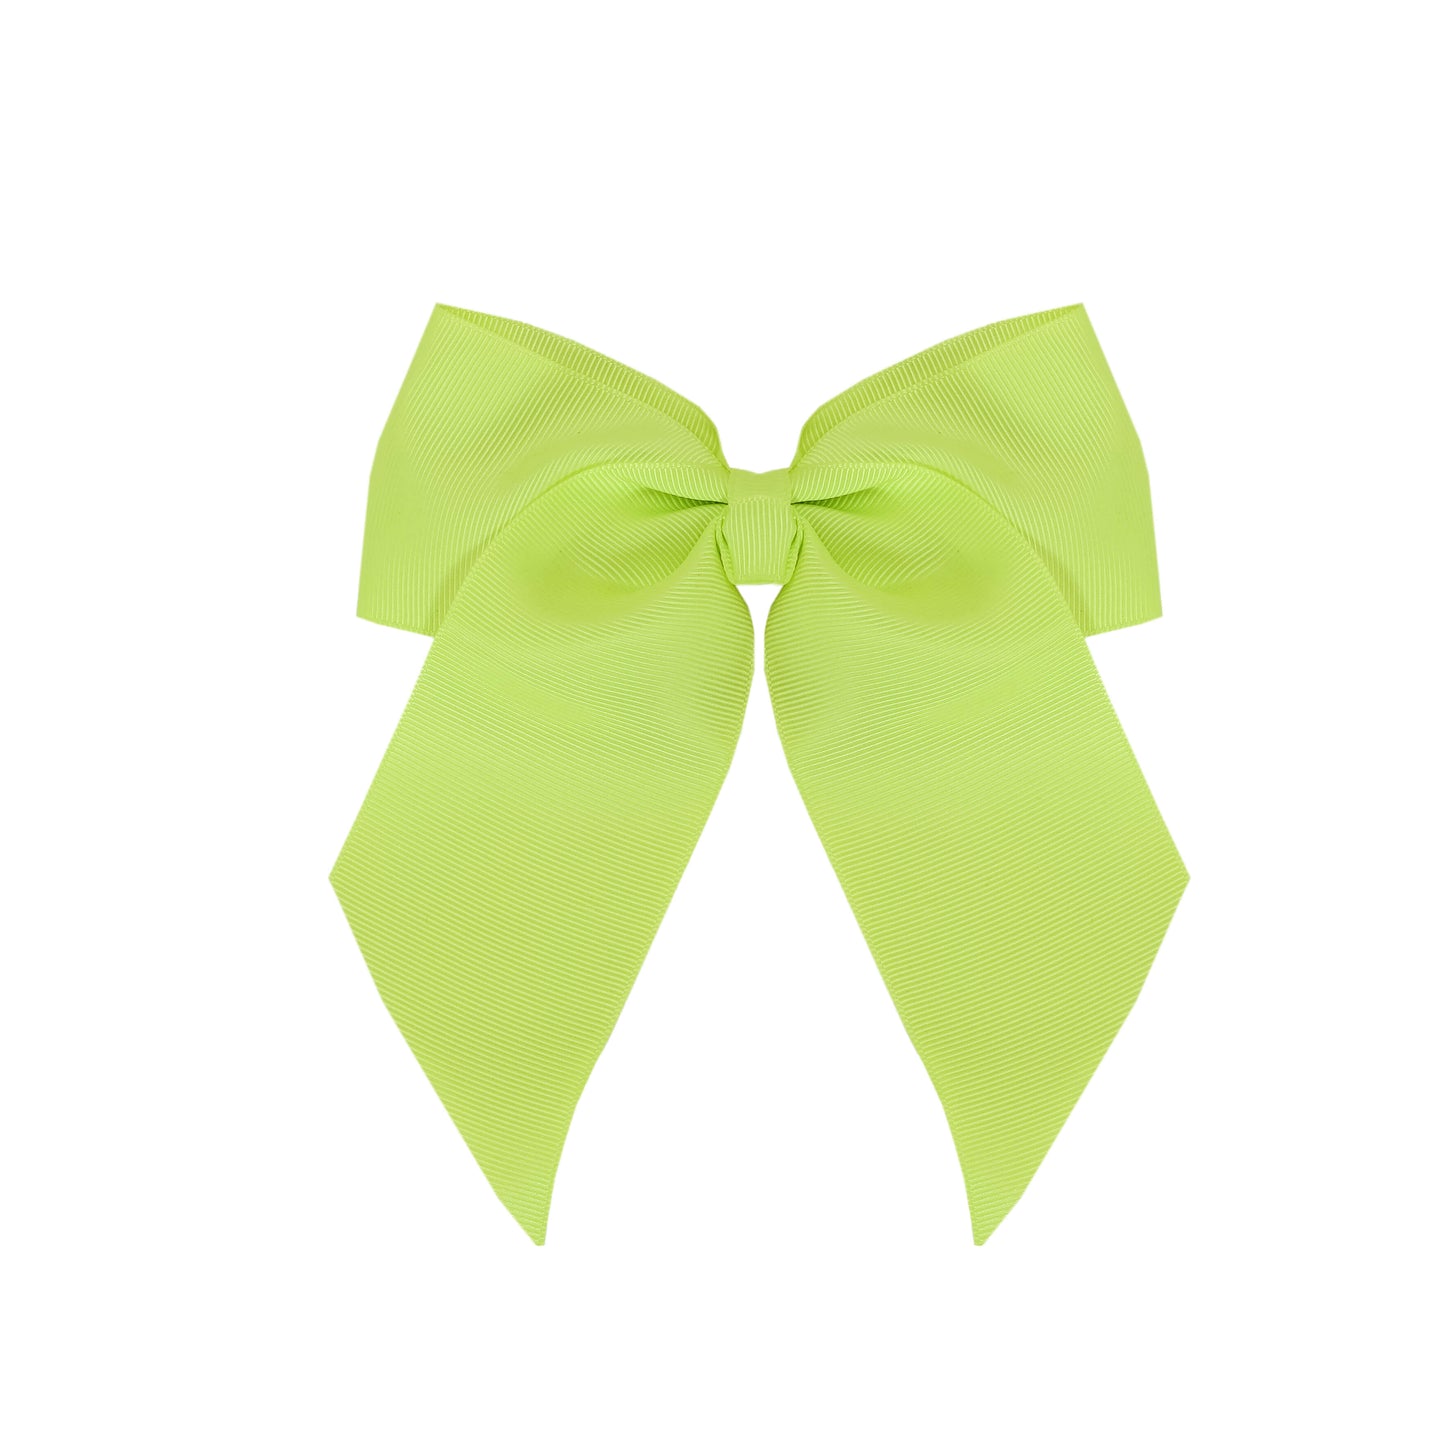 Pastry Slant Tail Bow in Optic Yellow